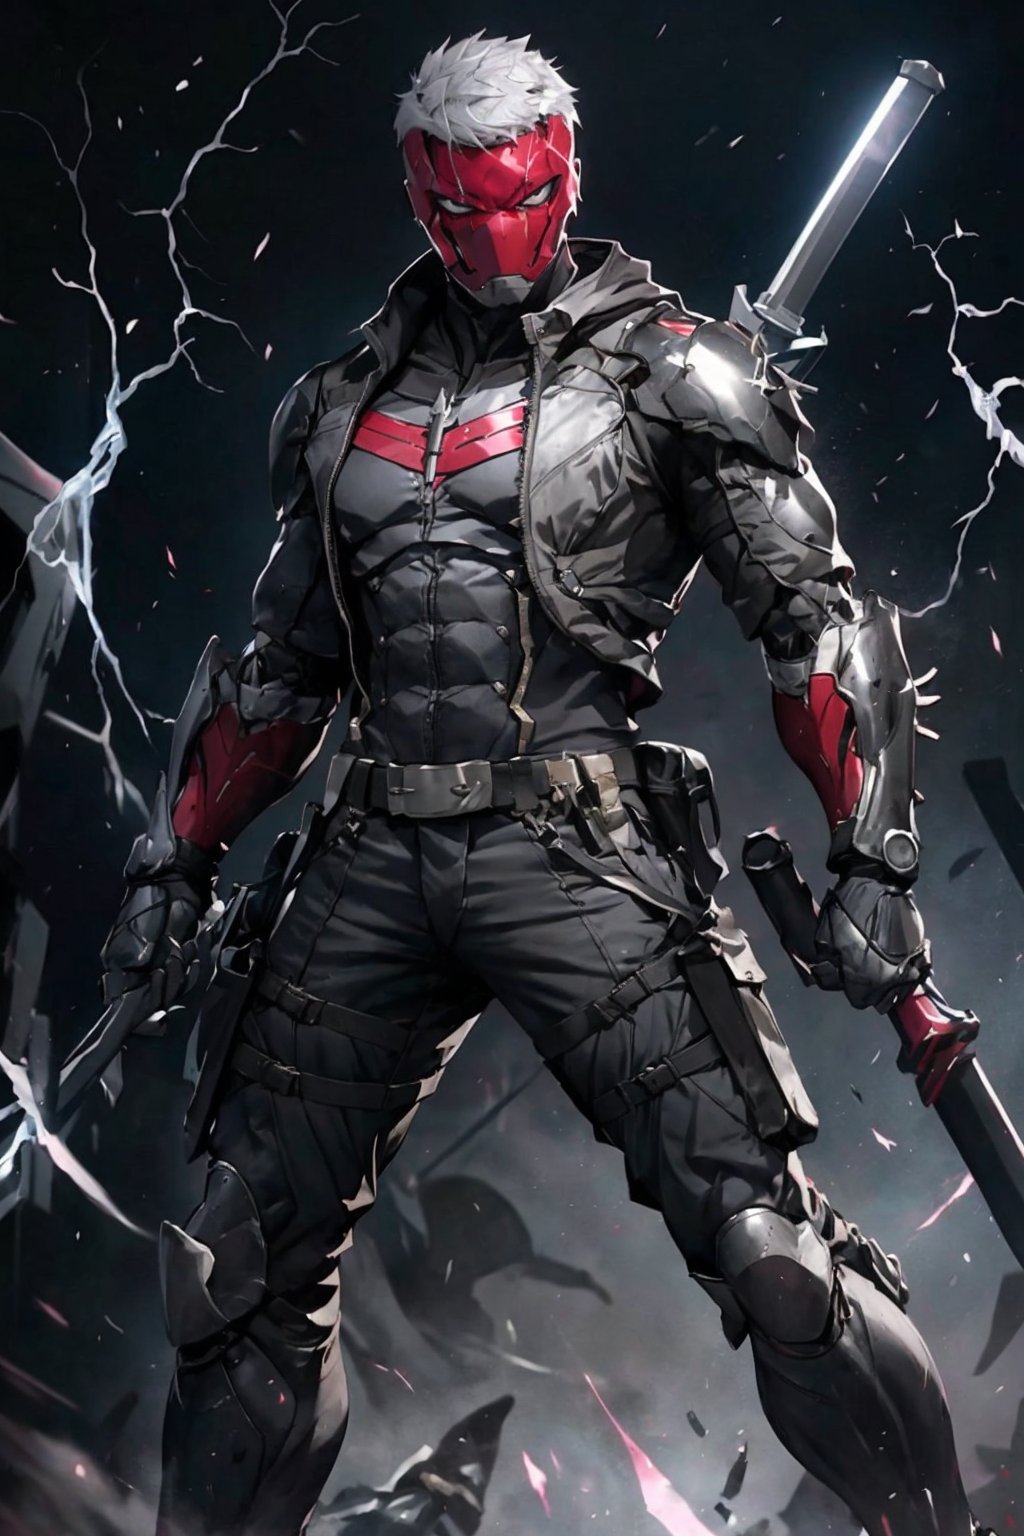 an accurate and detailed full-body shot of a male superhero character named Wraith, tall and lean bulid, (Crimson half-mask:1.3), exposed cybernetic red eye, grafted cybernetic jawline, (Spiky white fringe hair:1.2), (choppy black undercut hairstyle:1.2), Skintight black ninja-tech suit with crimson energized circuitry, (electric blue biker jacket), asymmetric collar, rolled sleeves, Gunmetal armor plates on shoulders, chest emblem, (Fitted burgundy leather moto-pants), (blue-gray armorized cargo panels), Knee guards, armored greaves, black combat boots, cyberized gunmetal strike gauntlet, Holsters, sheaths, tech-utility pouches, holding an obsidian high-frequency katana, masterpiece, high quality, 4K, raidenmgr, nero, rhdc, a man, red helment, brown leather jacket, gray skintight suit, gloves, belt, boots<lora:EMS-75483-EMS:0.400000>, <lora:EMS-14003-EMS:0.500000>, <lora:EMS-311133-EMS:0.500000>